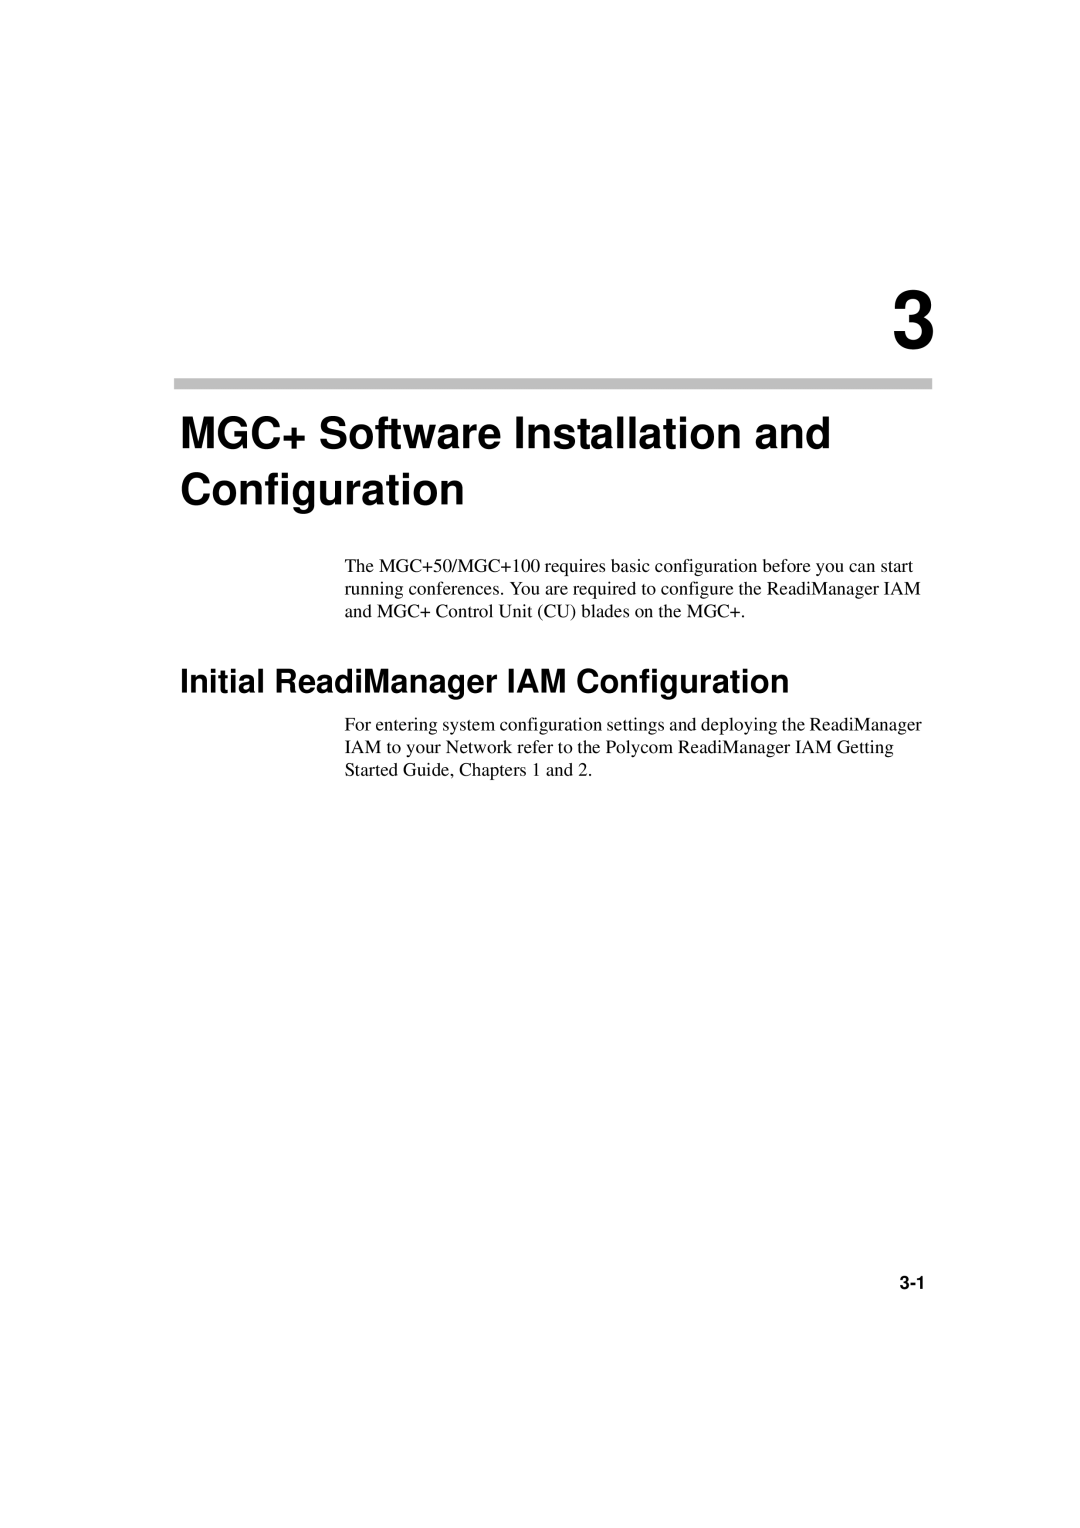 Polycom DOC2231A manual MGC+ Software Installation and Configuration, Initial ReadiManager IAM Configuration 